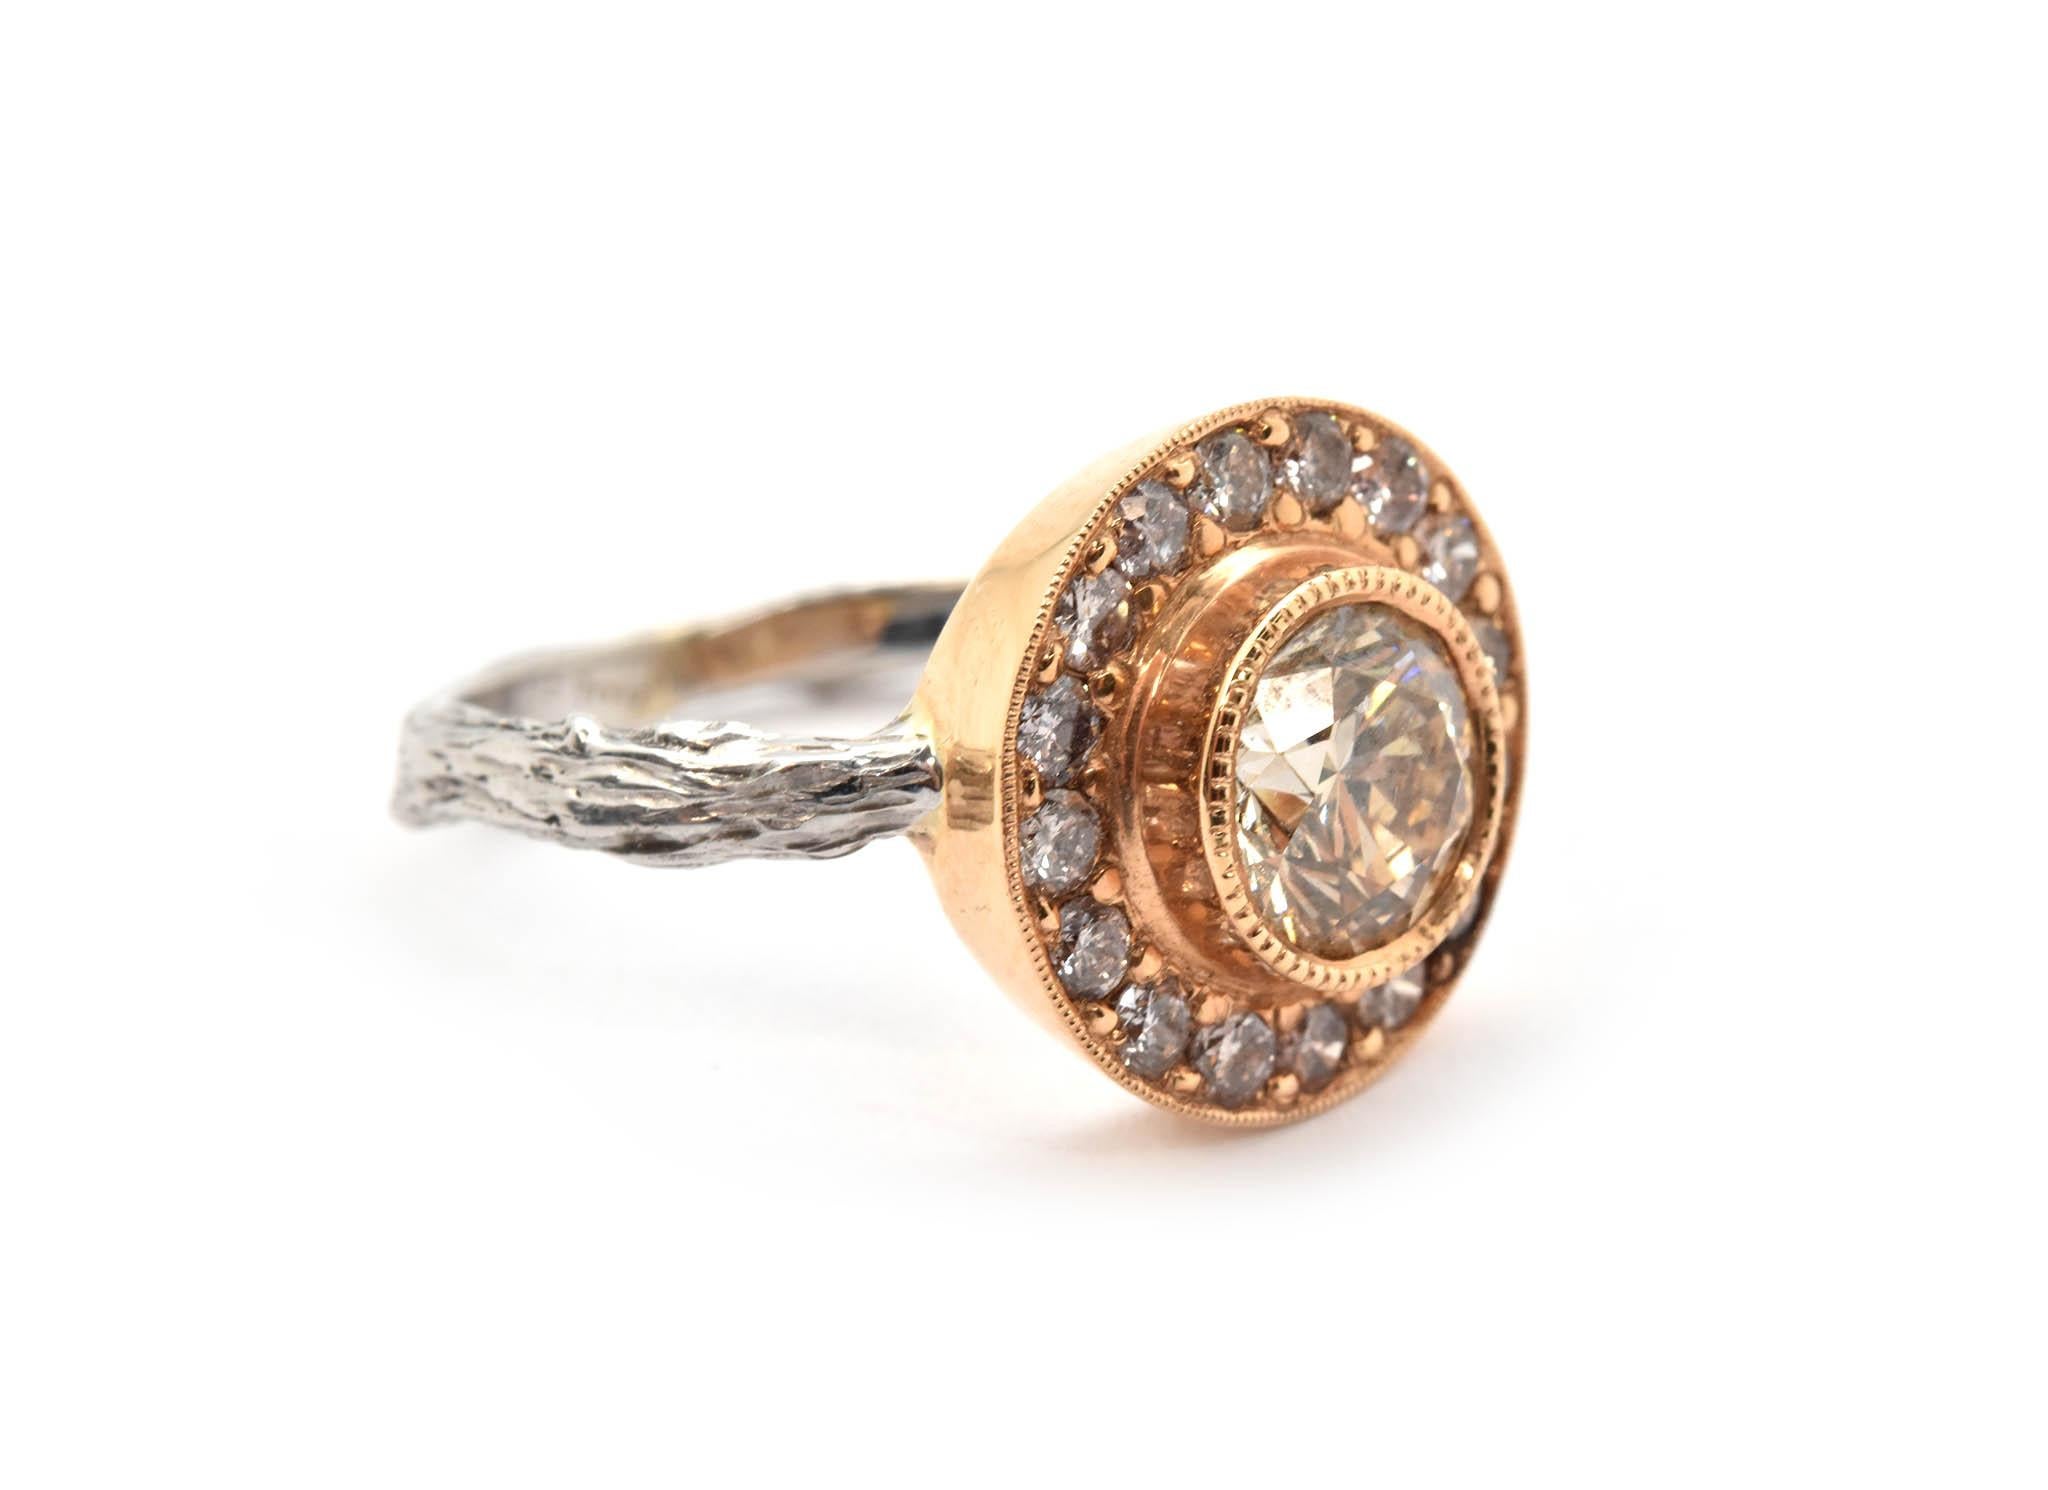 This gorgeous ring is made in 18k white and rose gold by K. Brunini for the Twig collection. The center diamond weighs approximately 1.10 carats, and it is graded champagne in color and VS1 in clarity. The center diamond is surrounded by a halo of